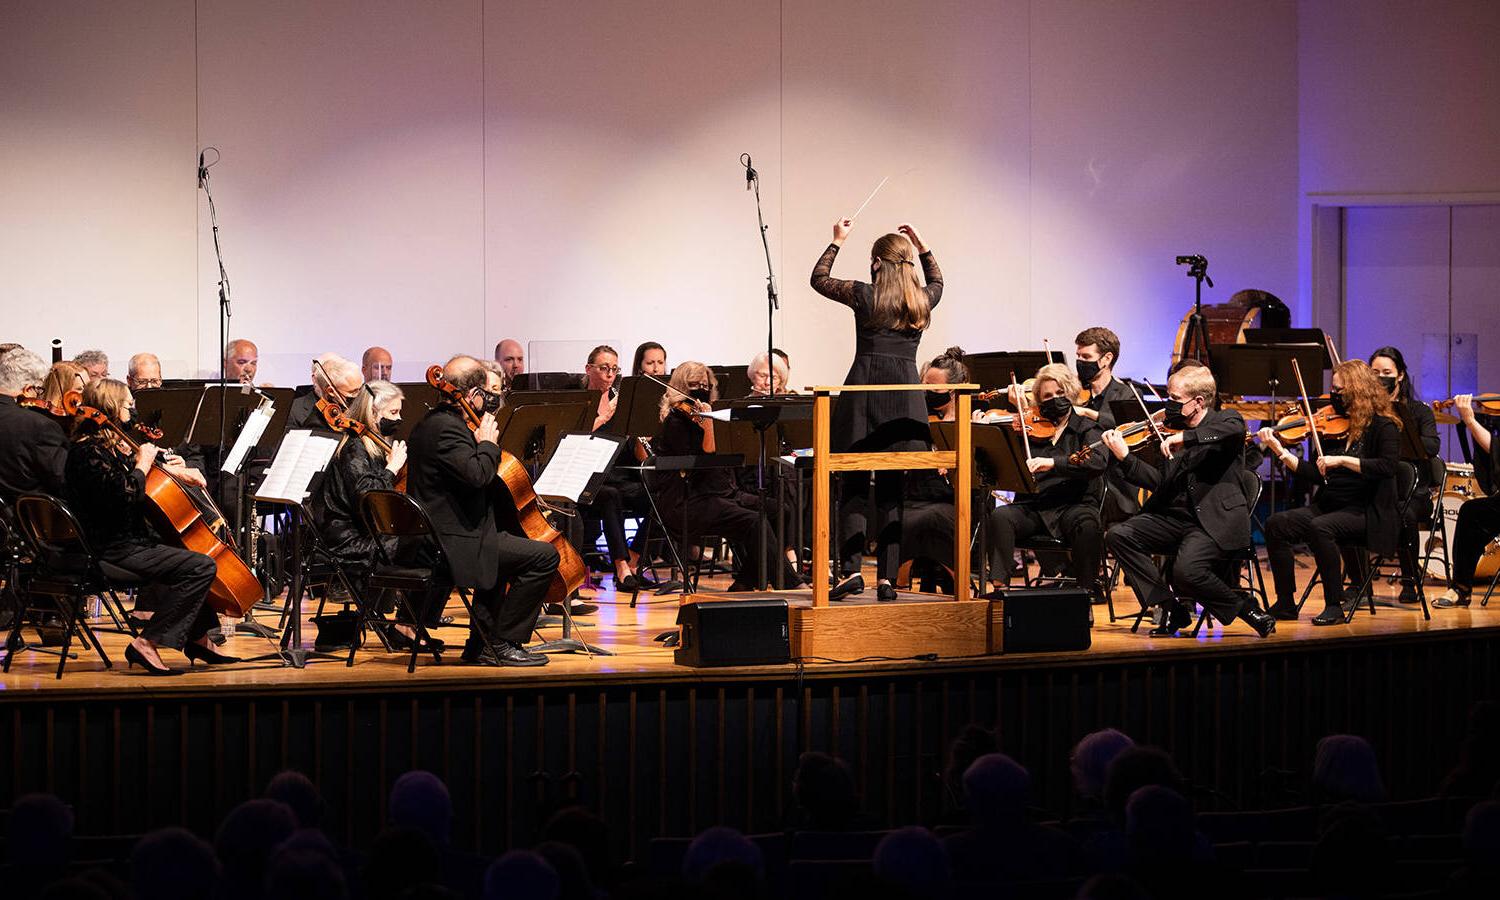 Salem College community orchestra playing while conductor leads